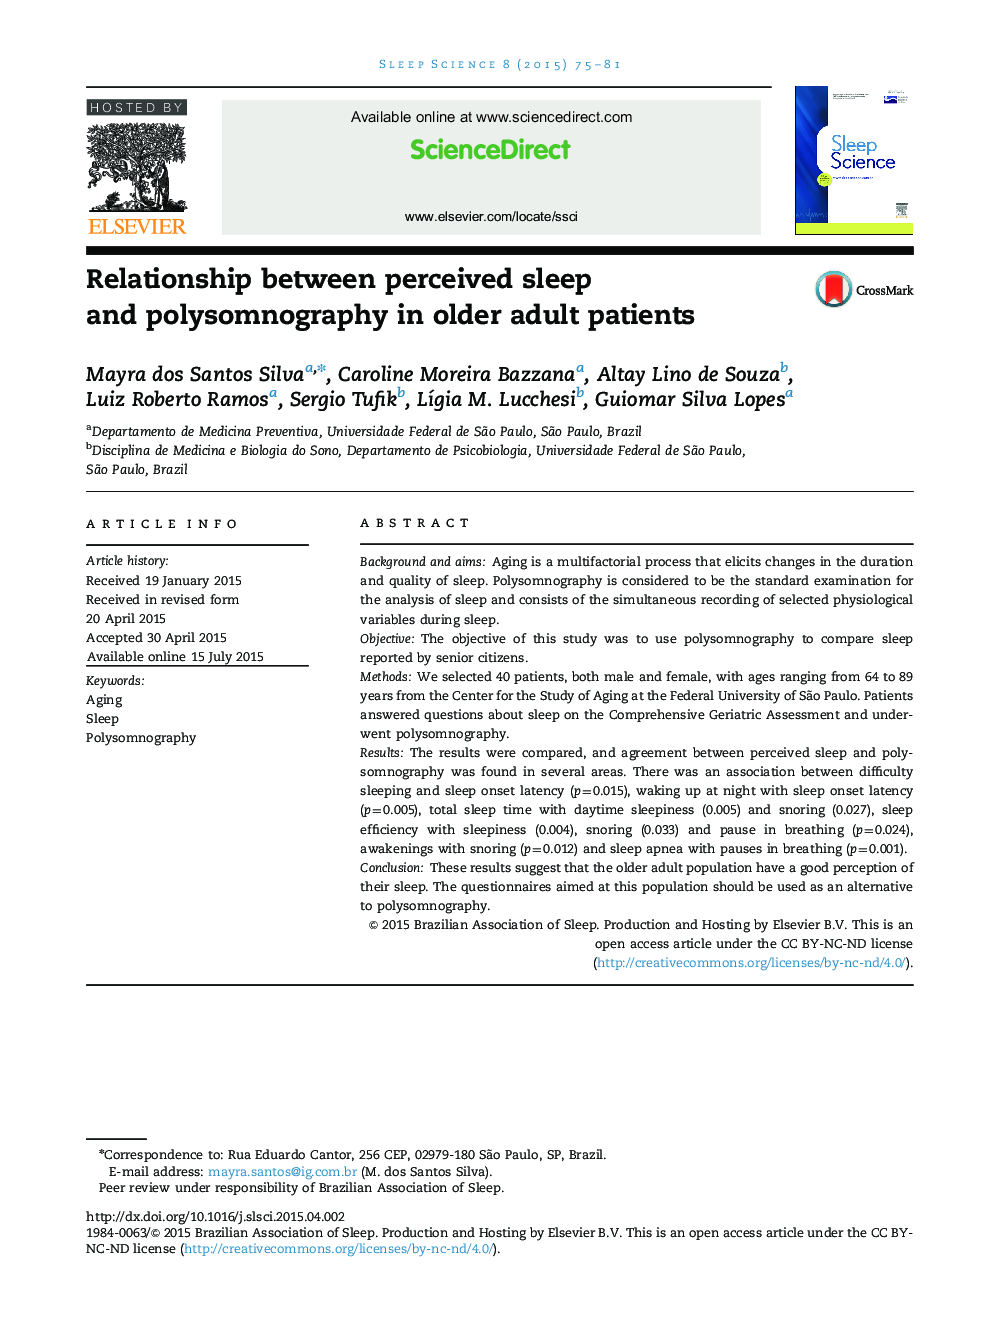 Relationship between perceived sleep and polysomnography in older adult patients 